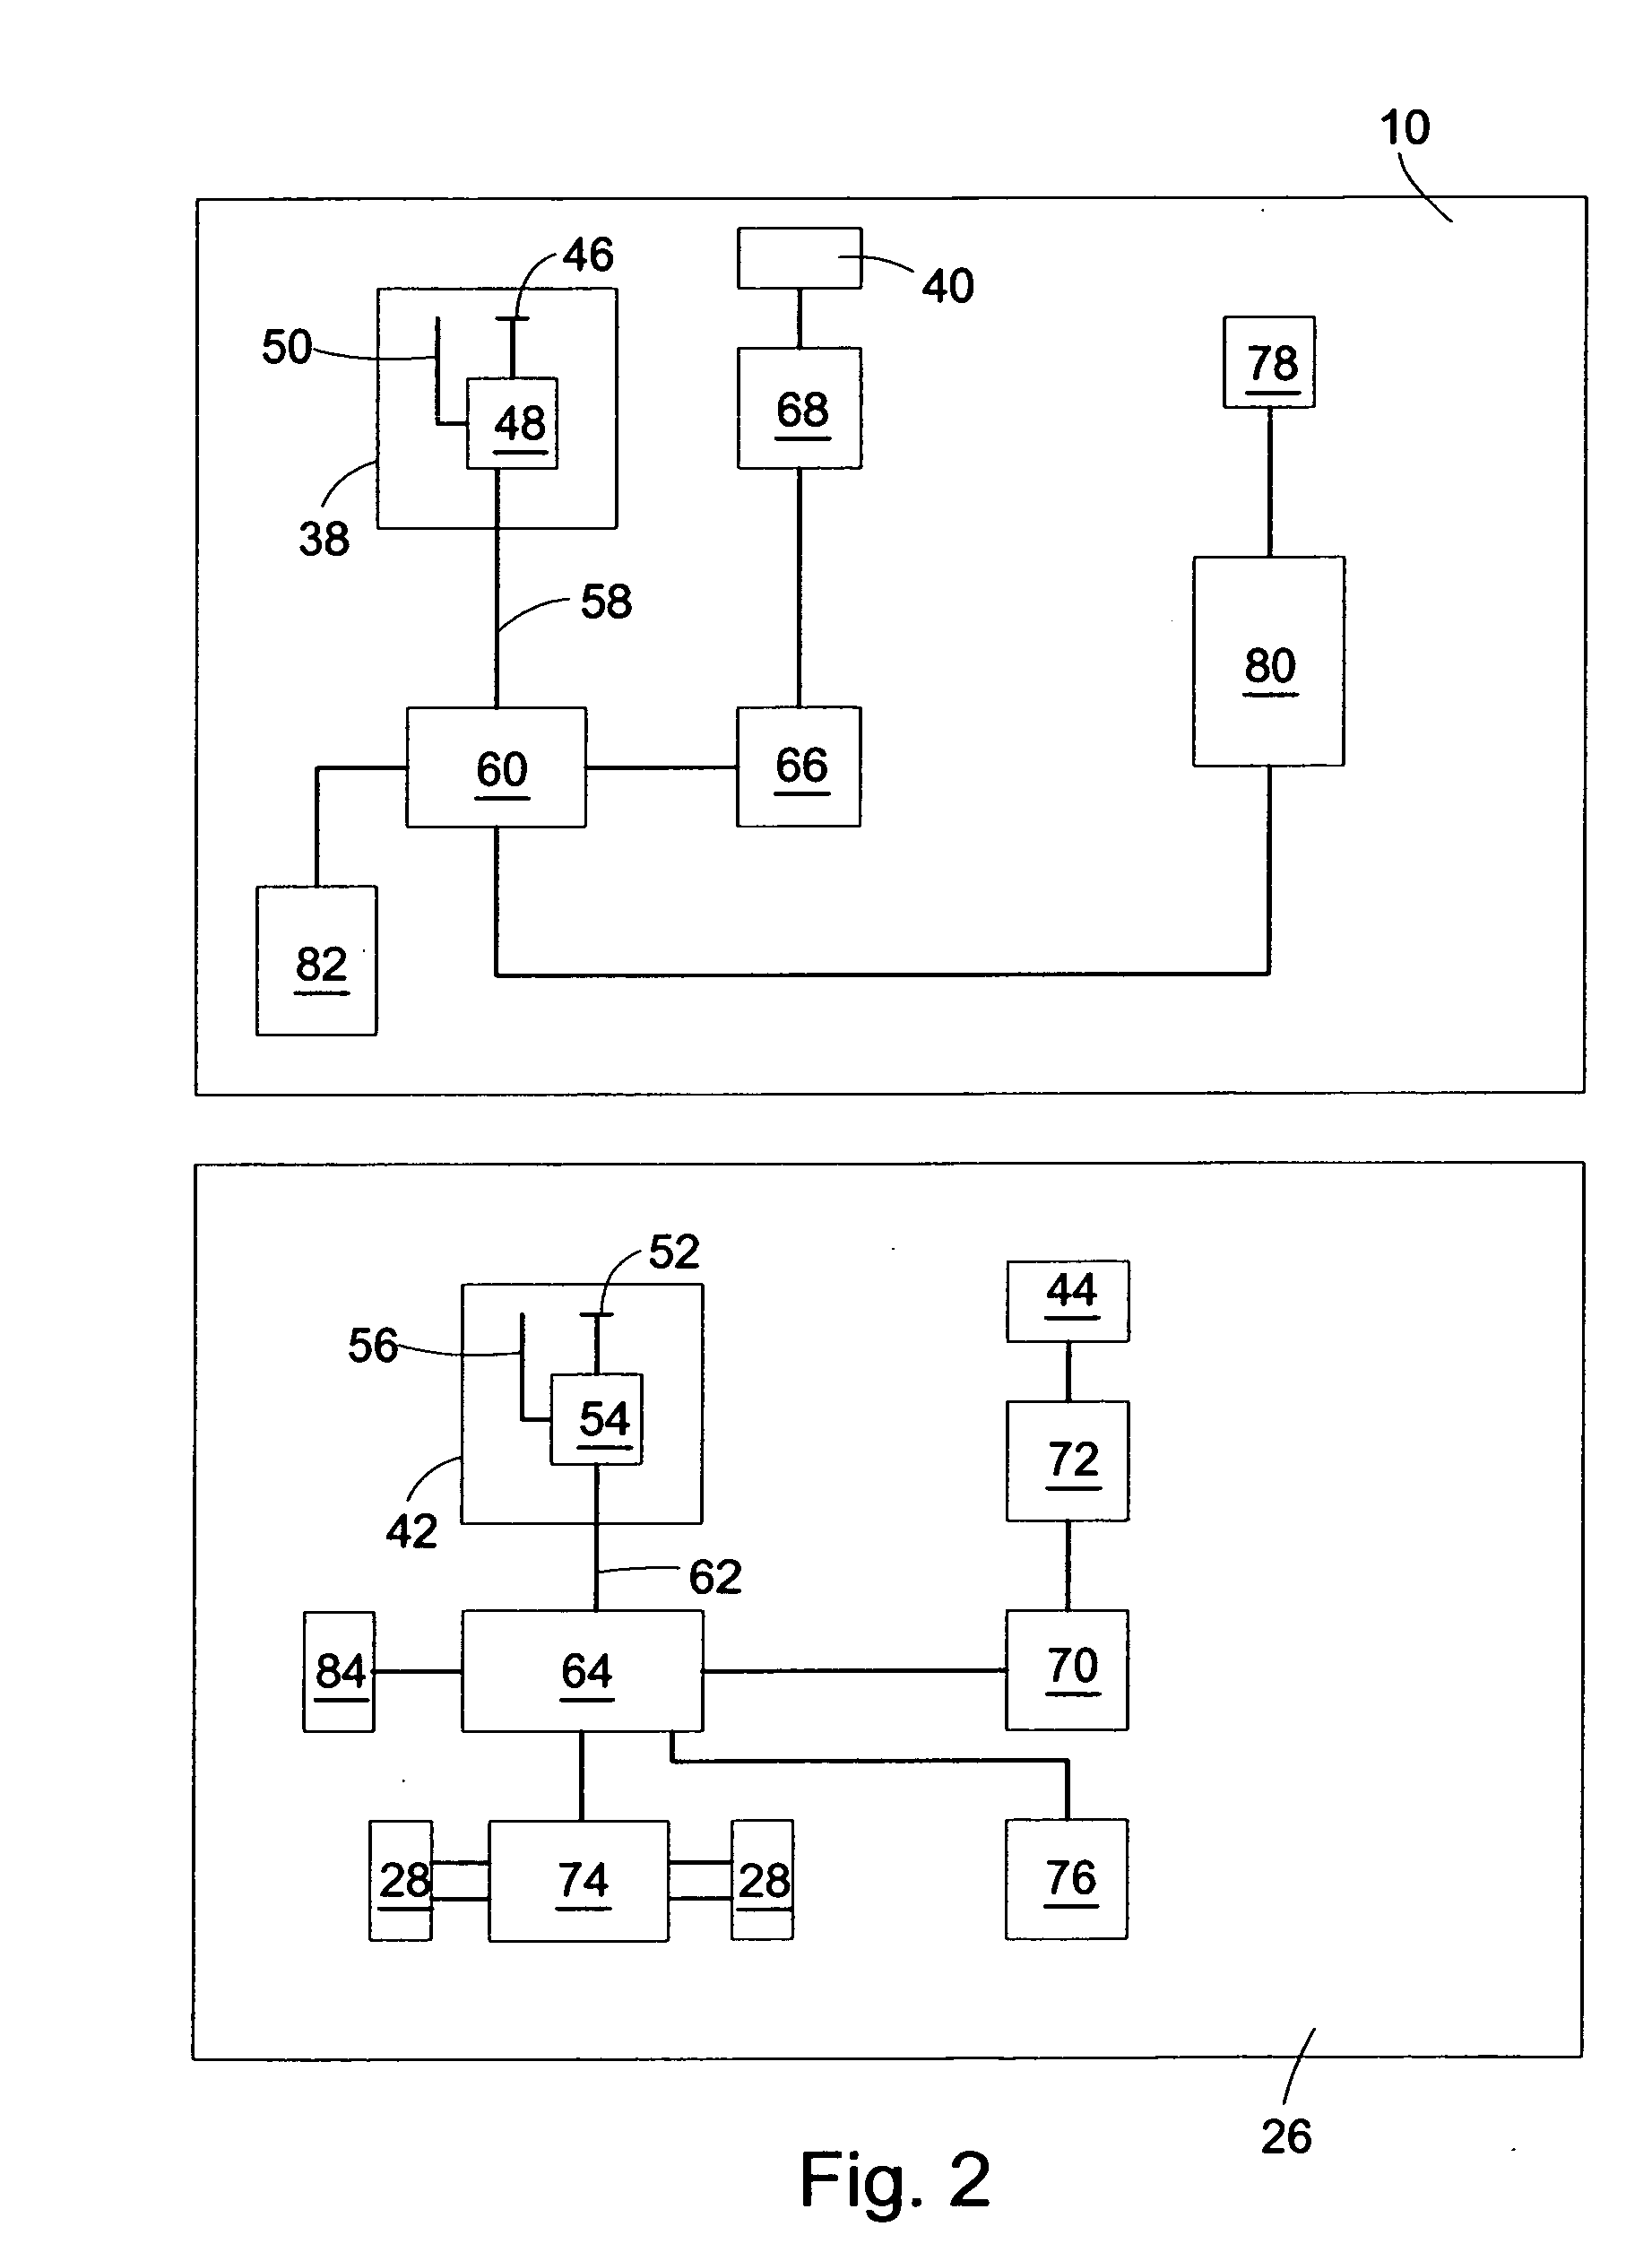 System for determining the relative position of a second farm vehicle in relation to a first farm vehicle